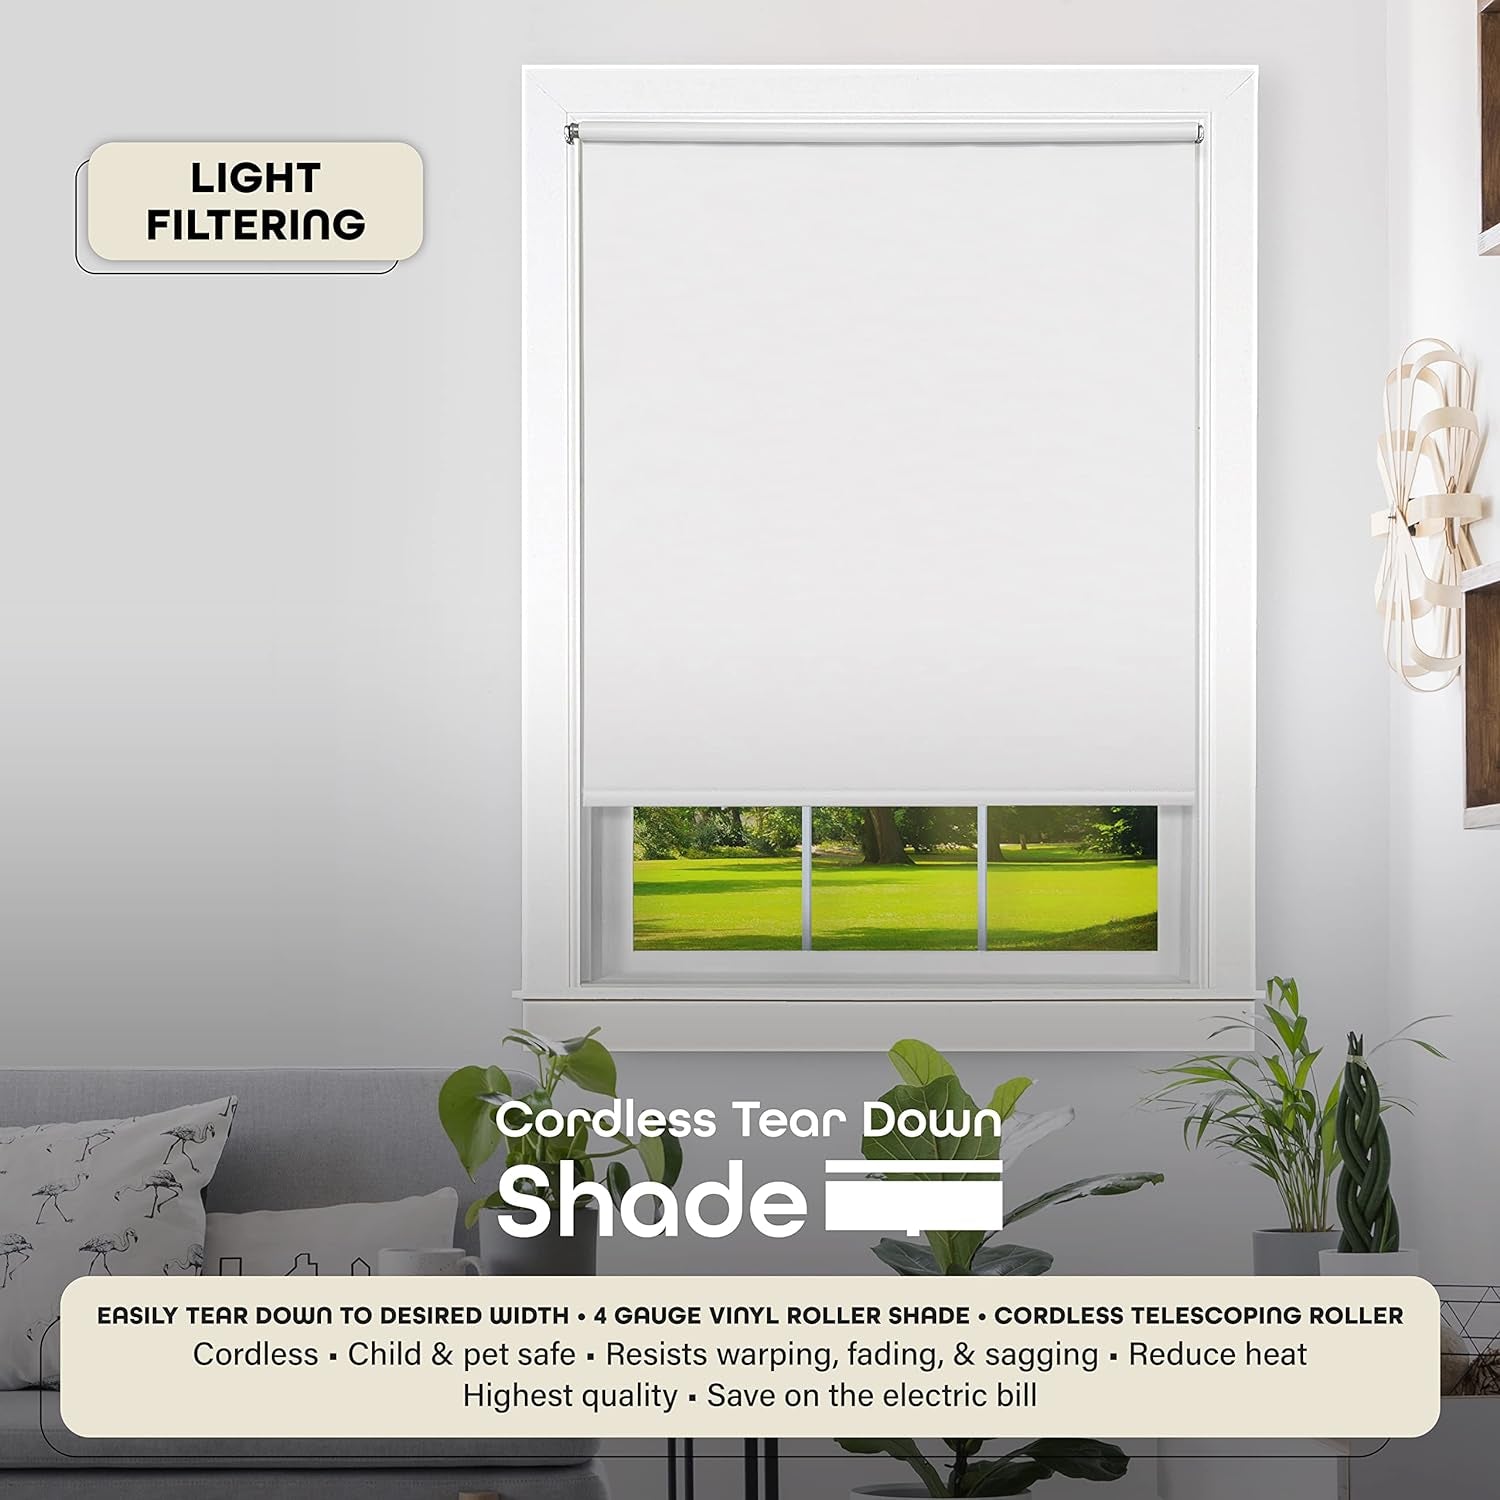 Cordless Tear down Light Filtering Shade - 37 Inch Width, 72 Inch Length - White- Cord-Free Customizable Room Darkening Horizontal Mini Vinyl Windows Blinds for Interior by Achim Home Decor